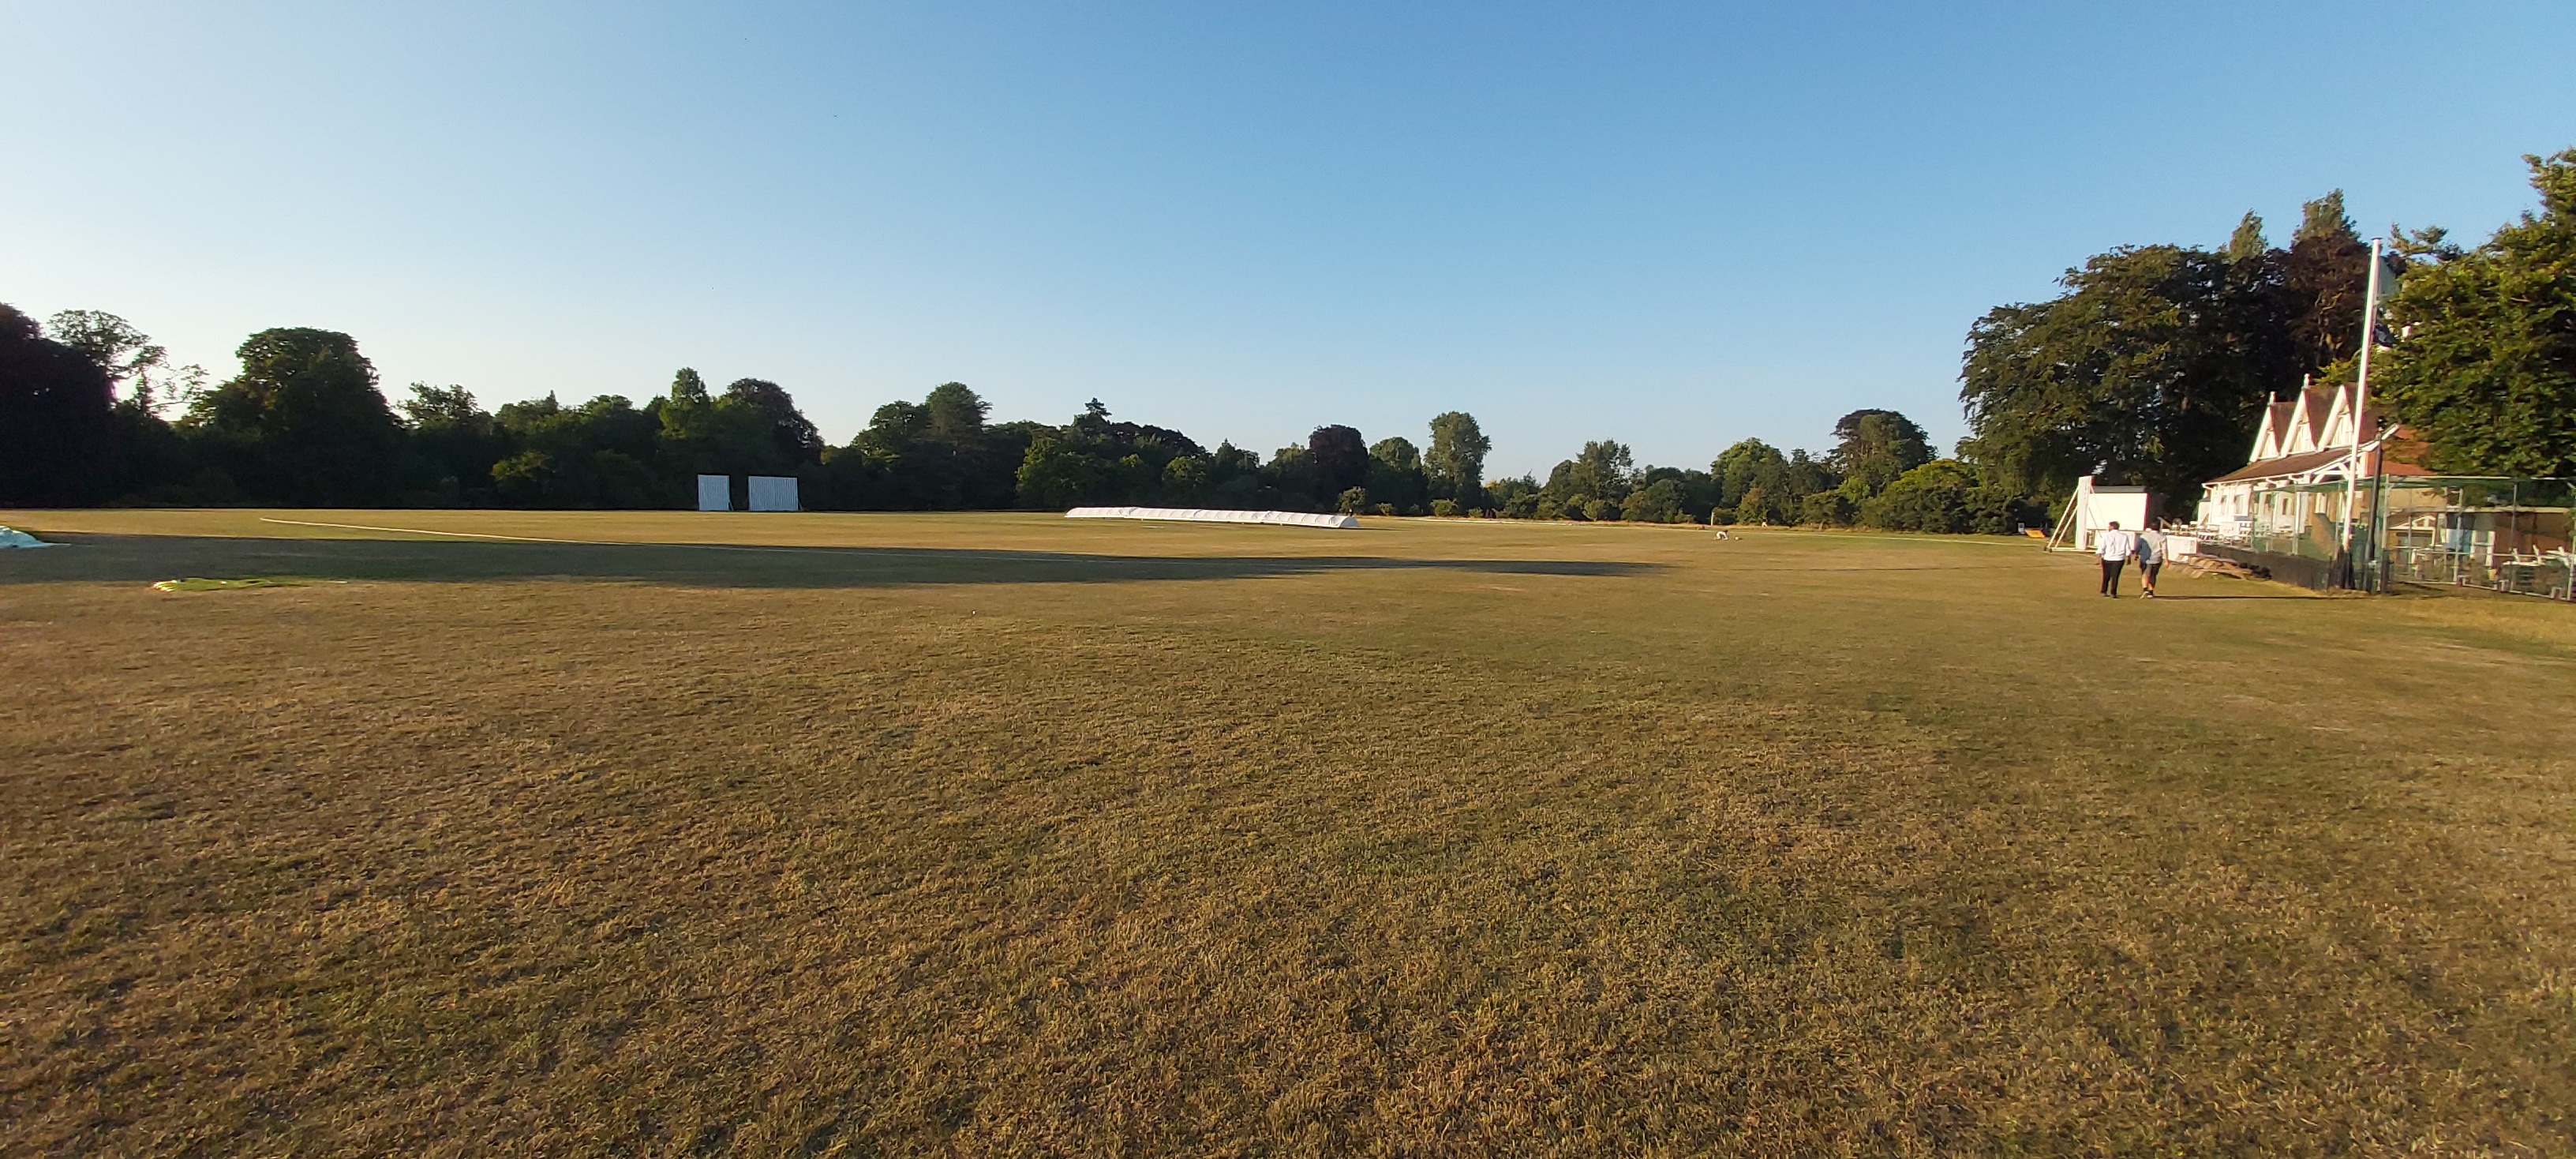 The Parks: the famous Oxford University cricket ground